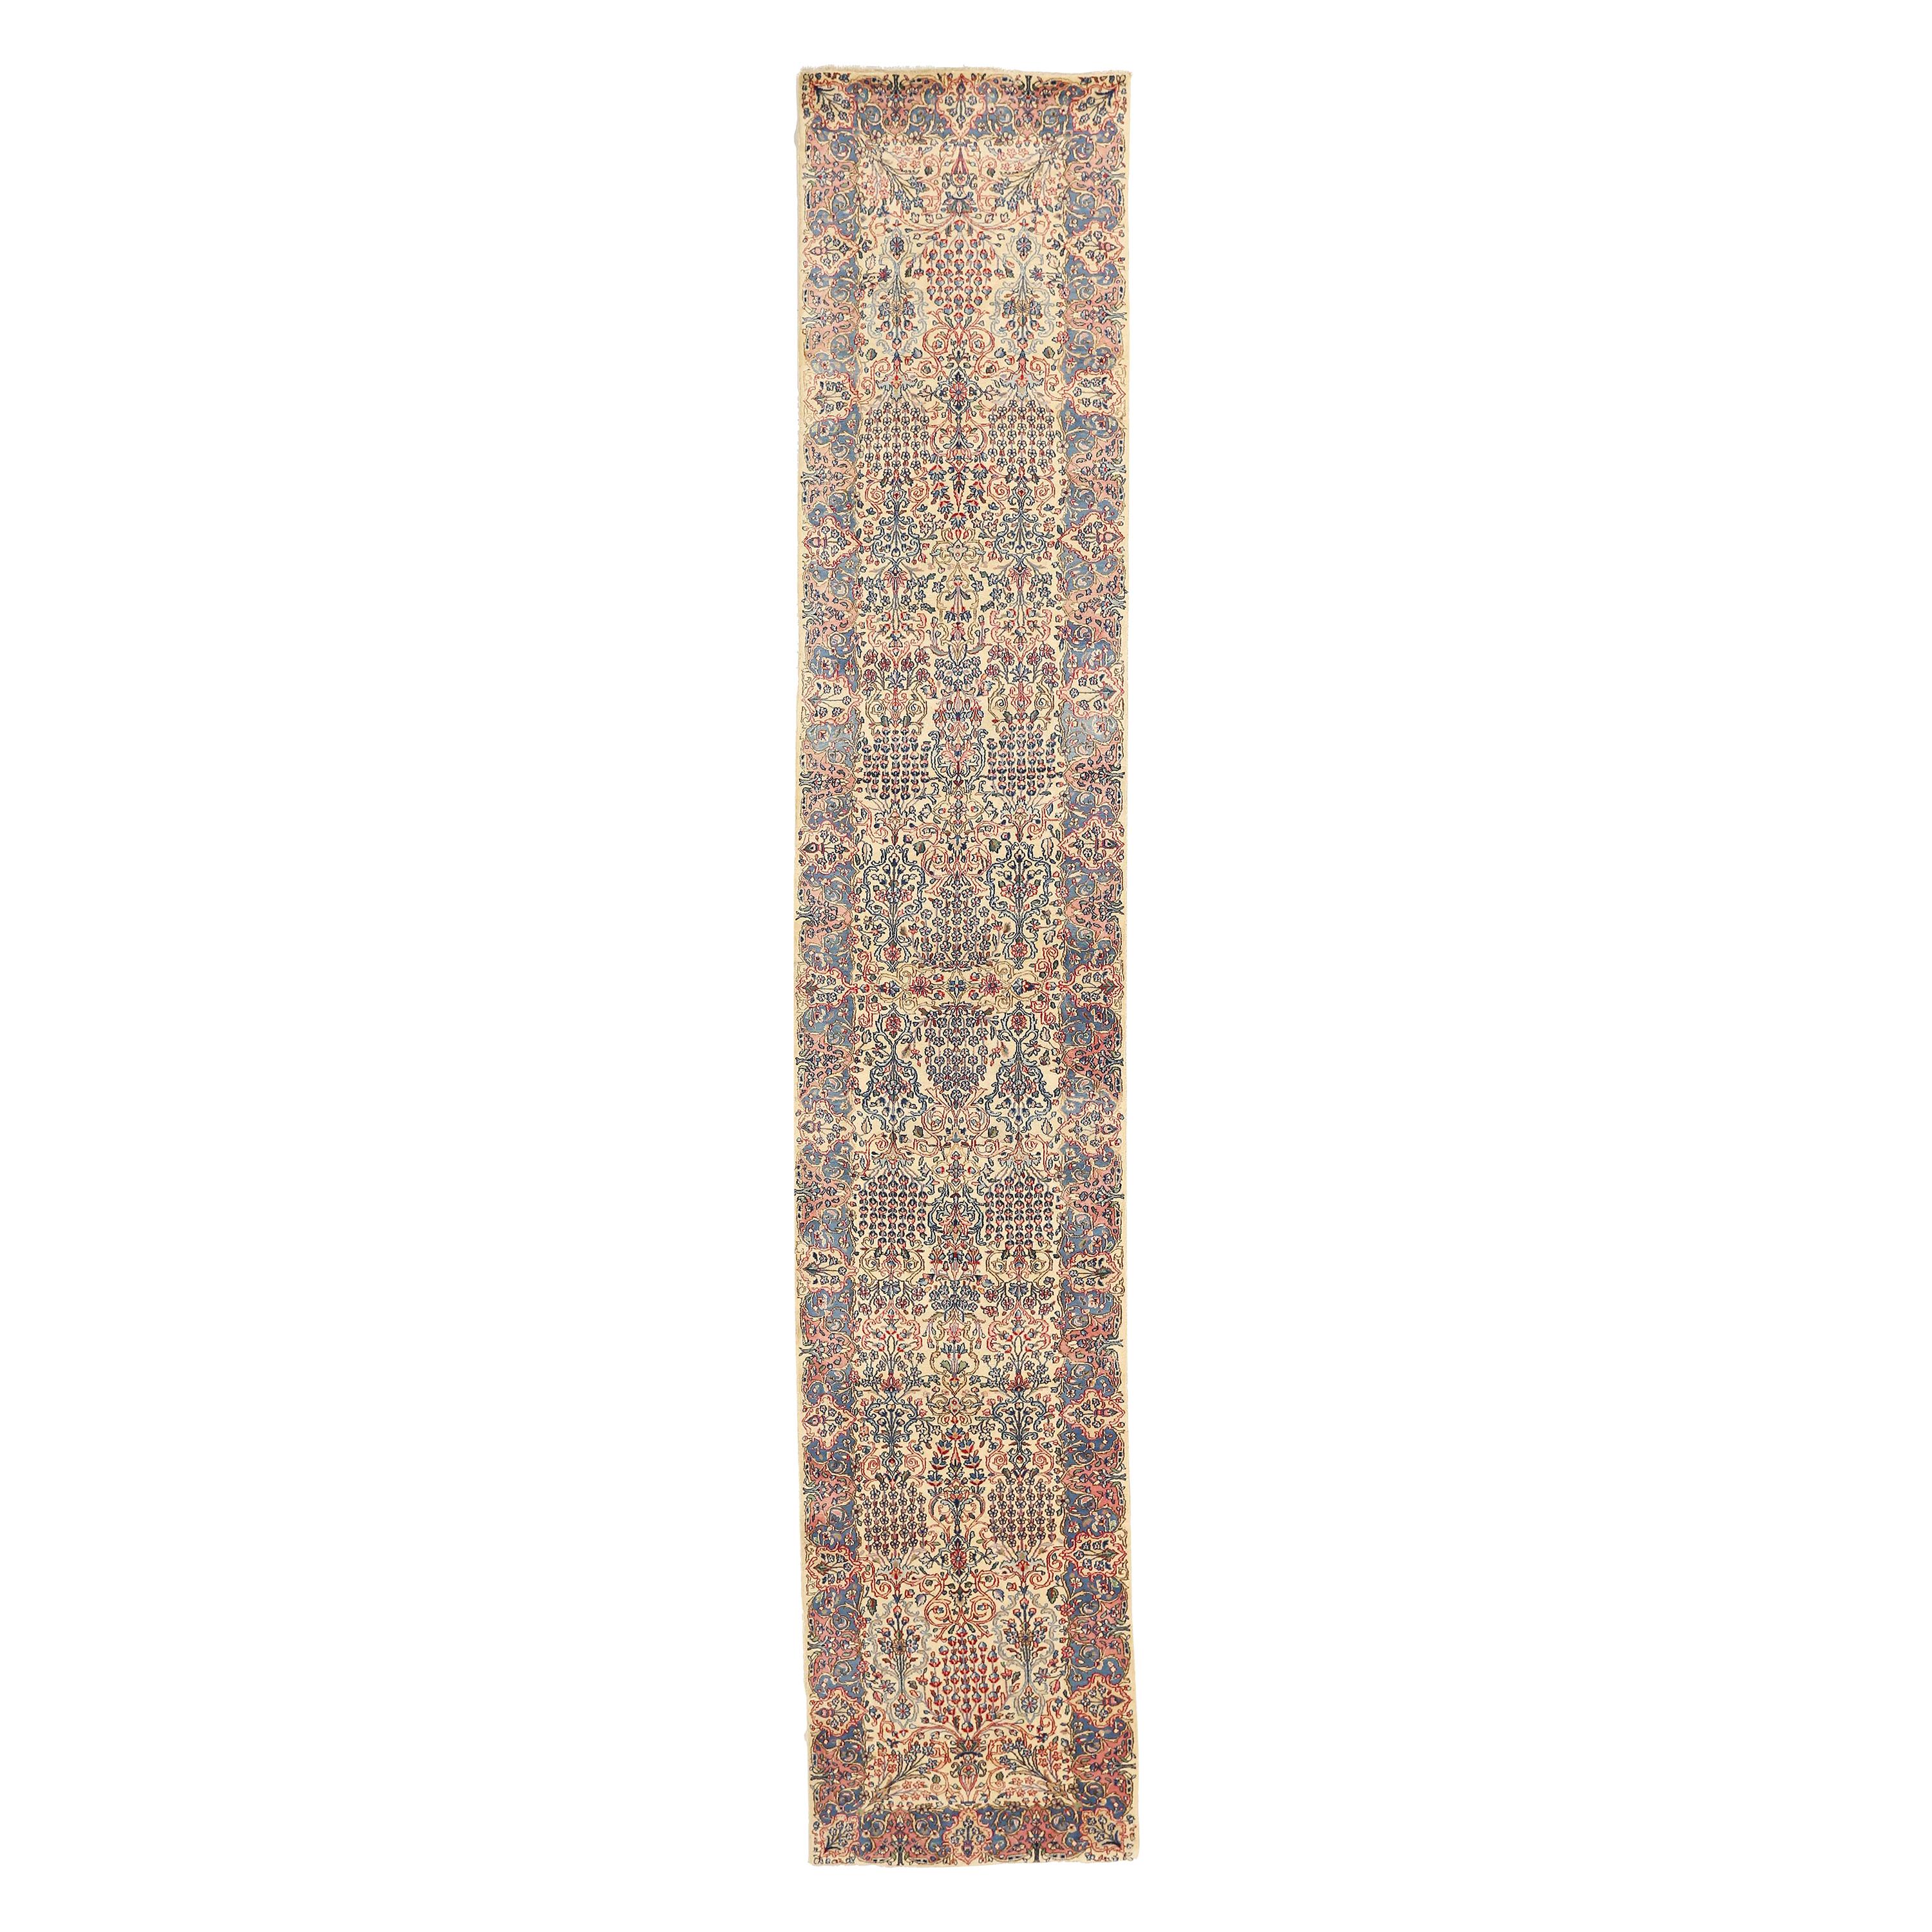 Antique Persian Kerman Runner Rug with Red & Blue Floral Motifs on Ivory Field For Sale